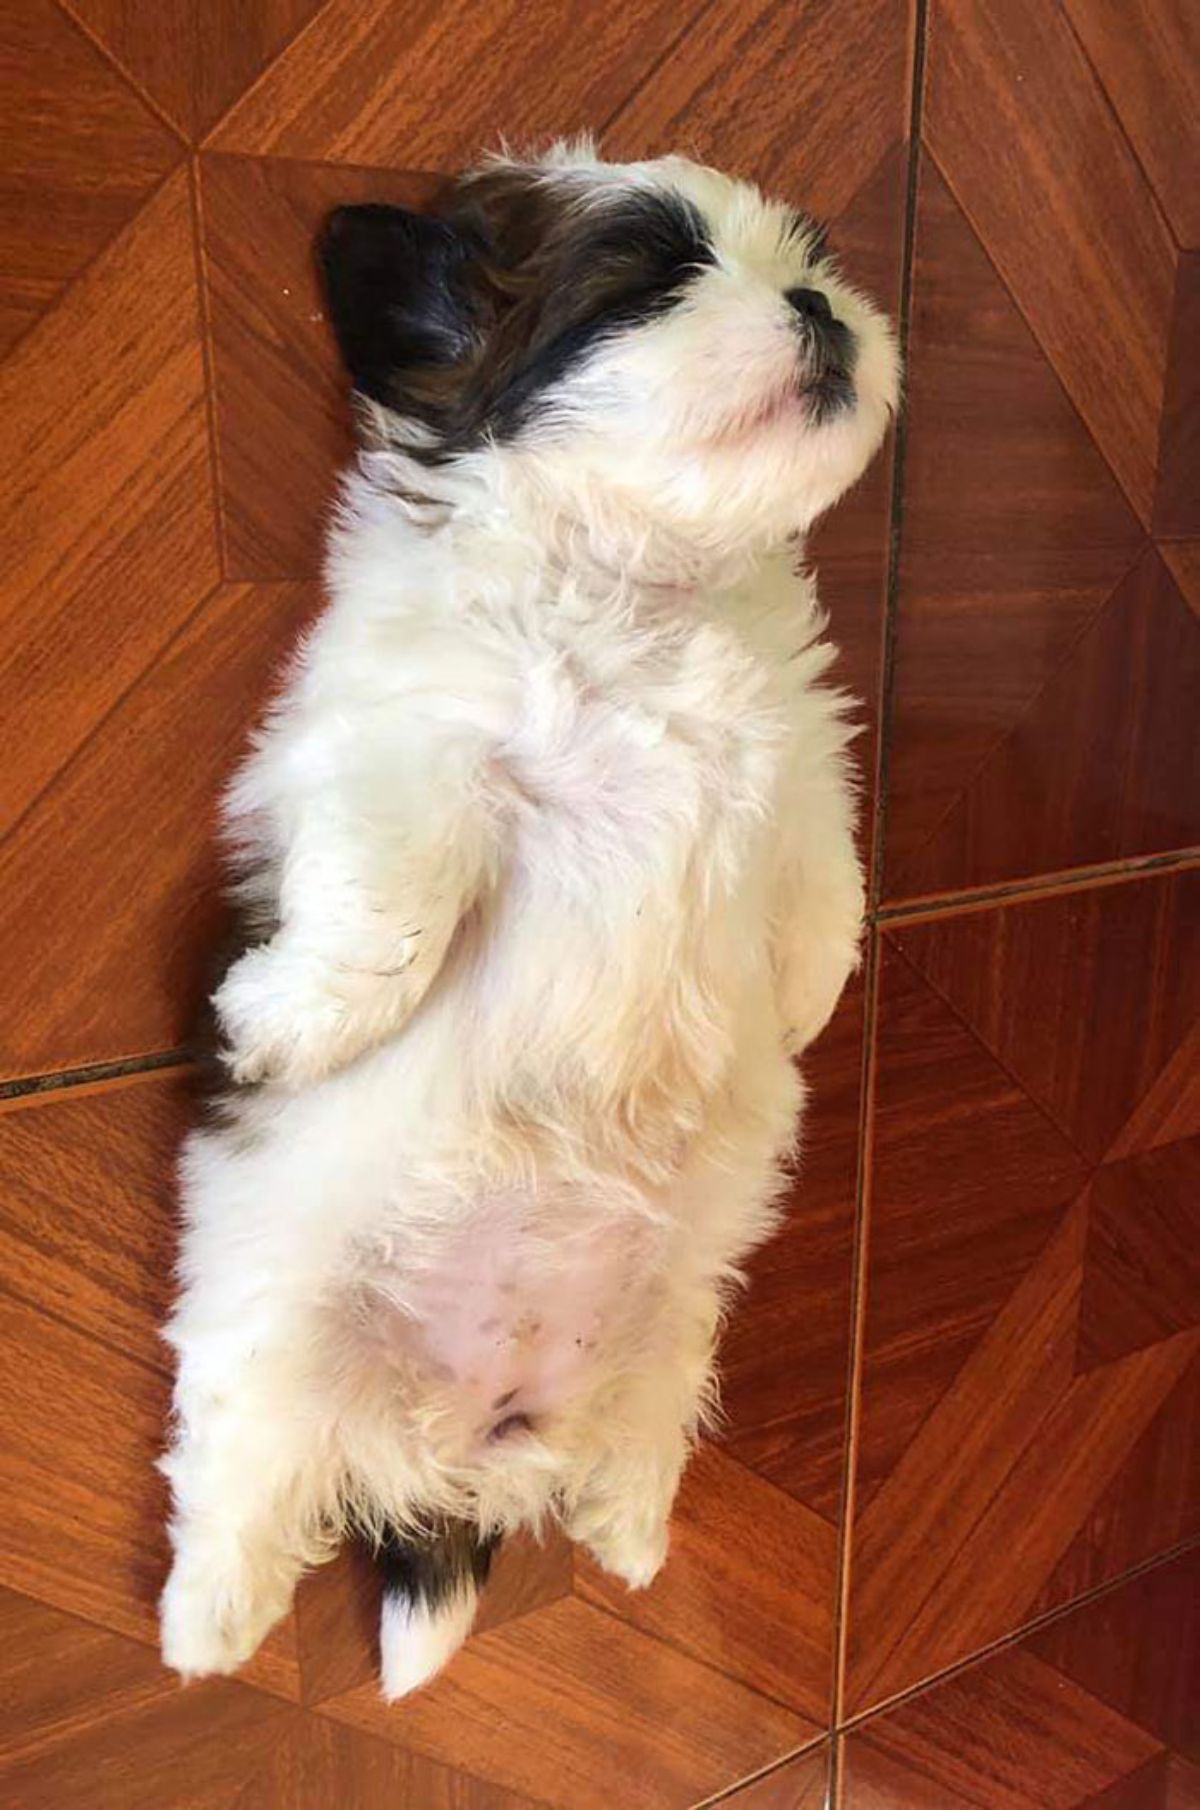 fluffy black and white small dog sleeping belly up with the legs straightened out